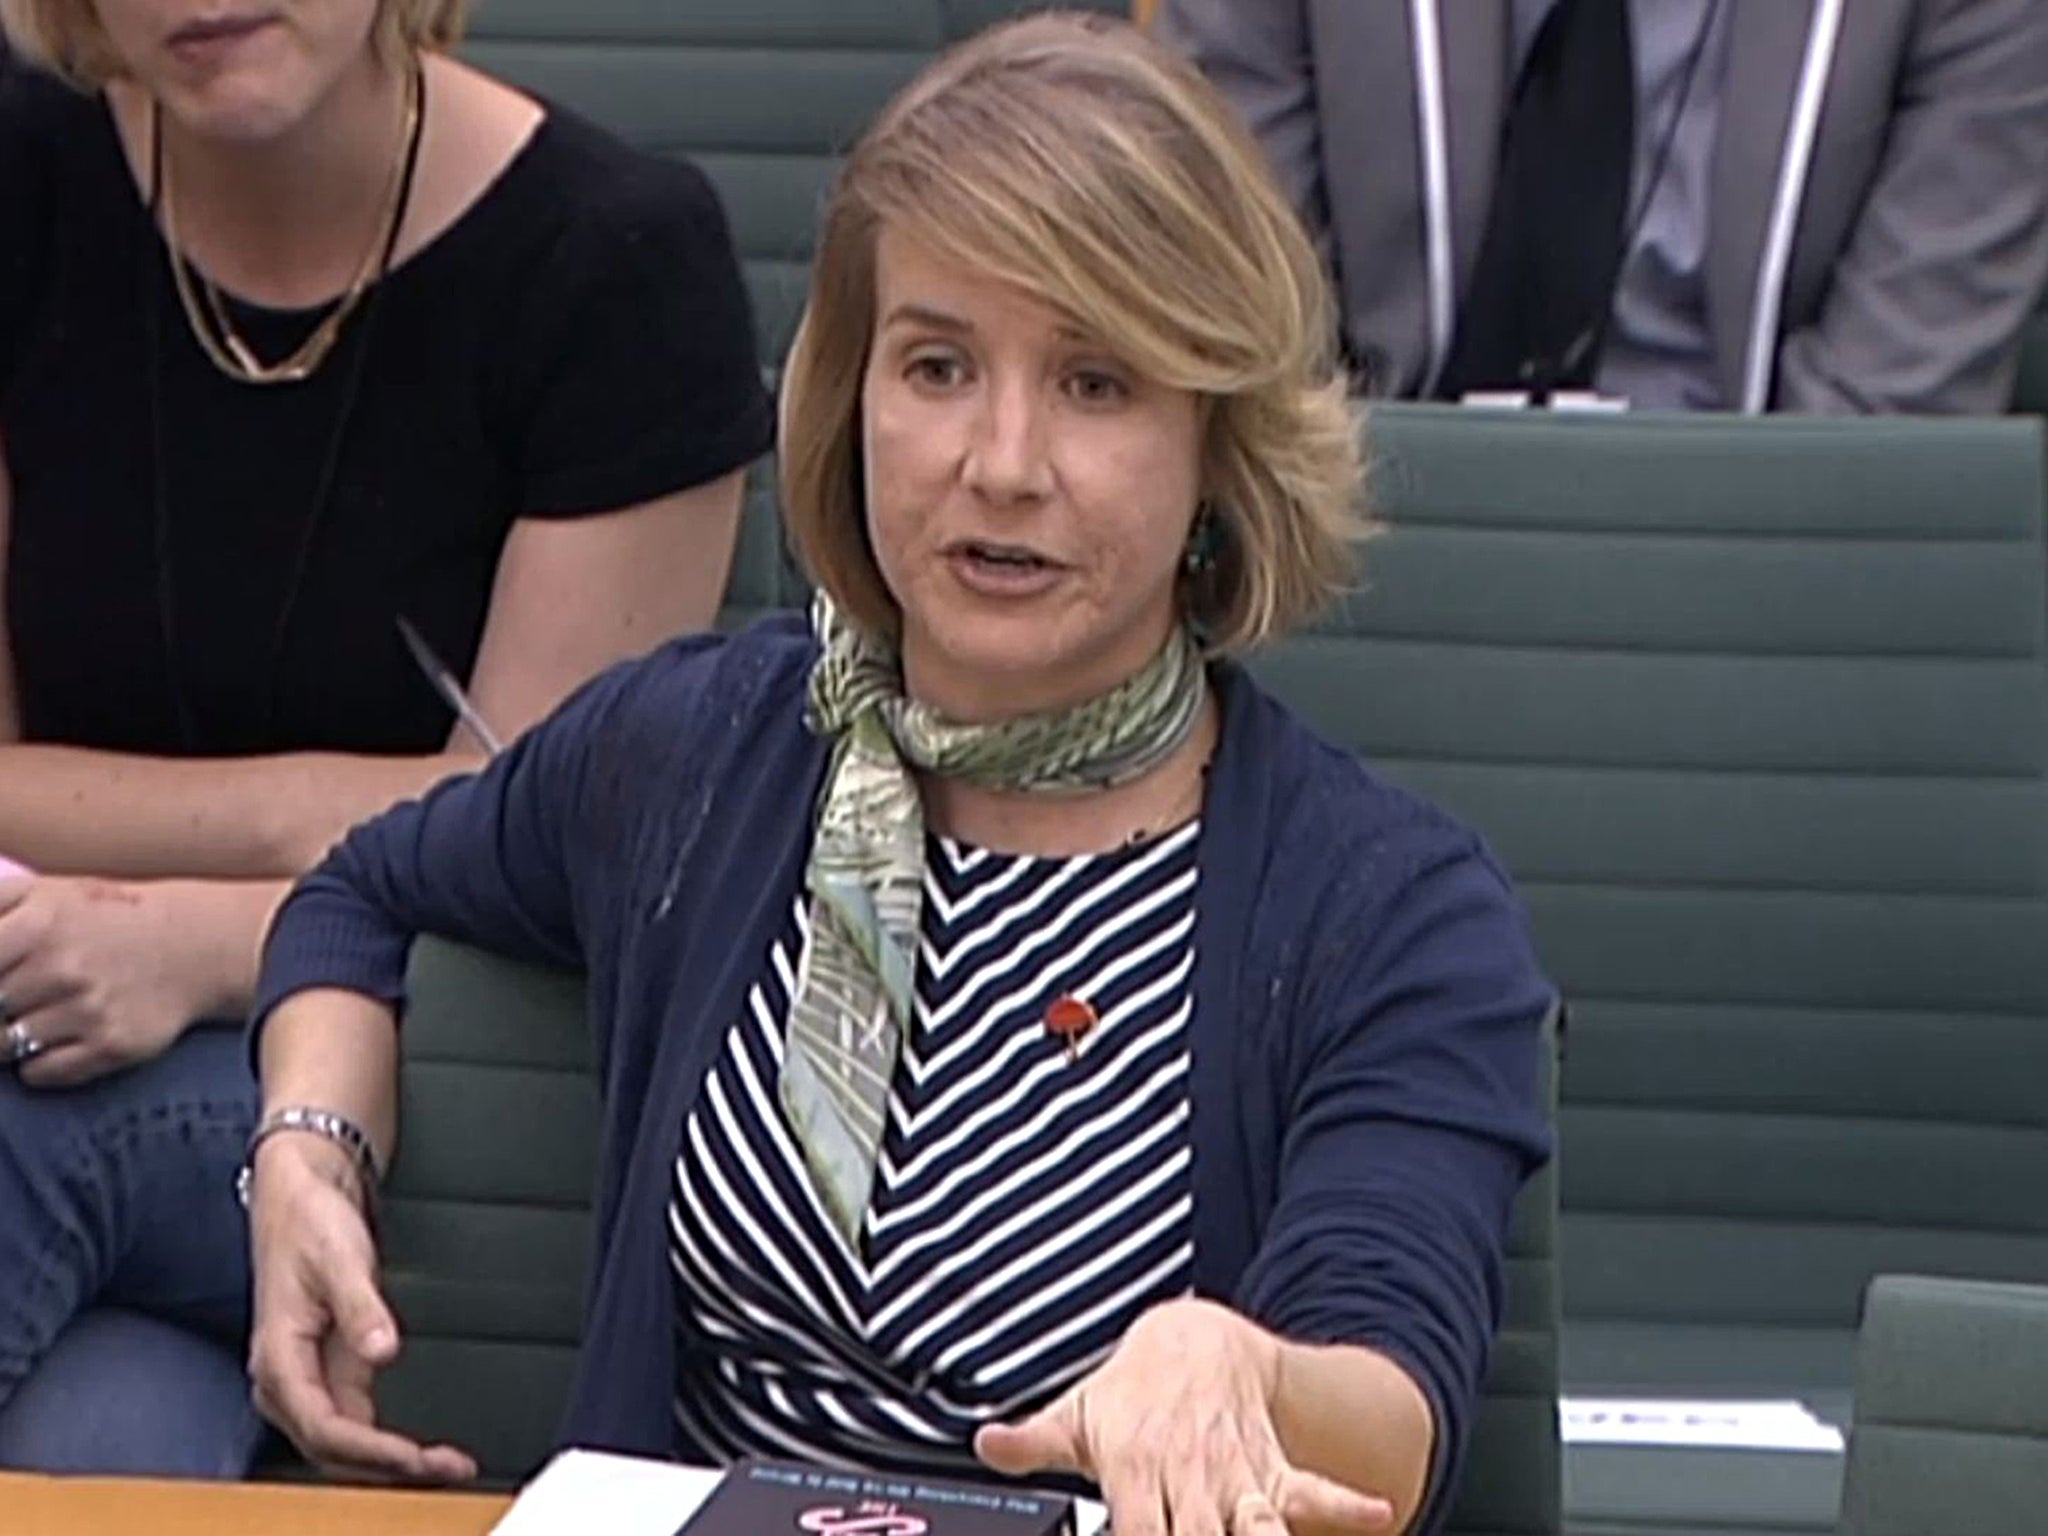 Dr Brooke Magnanti gives evidence on prostitution to the Home Affairs select committee at Portcullis House